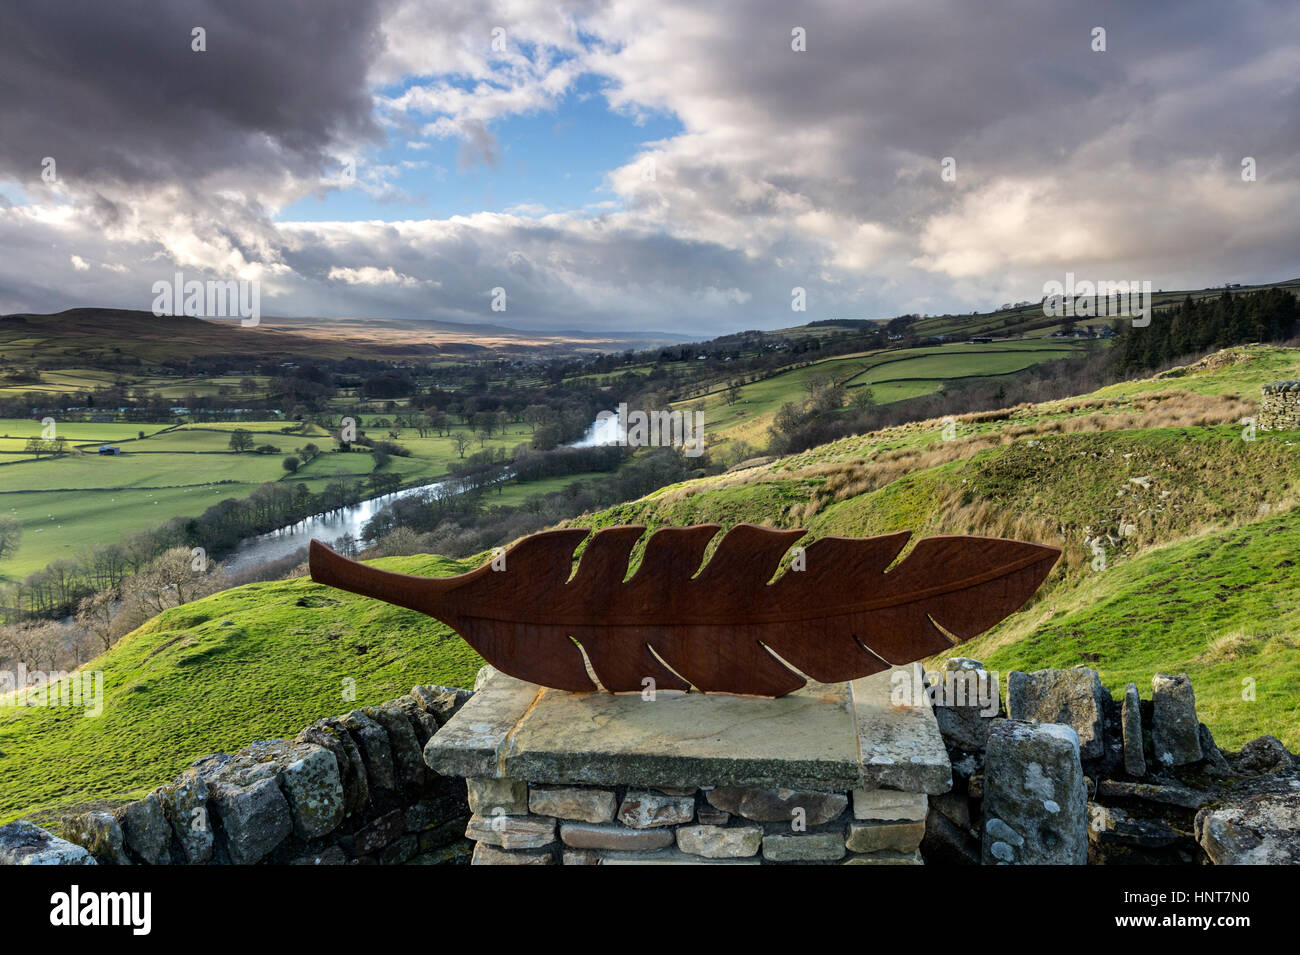 Whistle Crag, Middleton-in-Teesdale, County Durham, UK. 16th February 2017. UK Weather. A bright afternoon in the North Pennines as the sky clears over 'Air', one of eleven cast iron art pieces by sculptor Victoria Brailsford, which act as view-markers throughout the valley of Teesdale in County Durham. Credit: David Forster/Alamy Live News Stock Photo